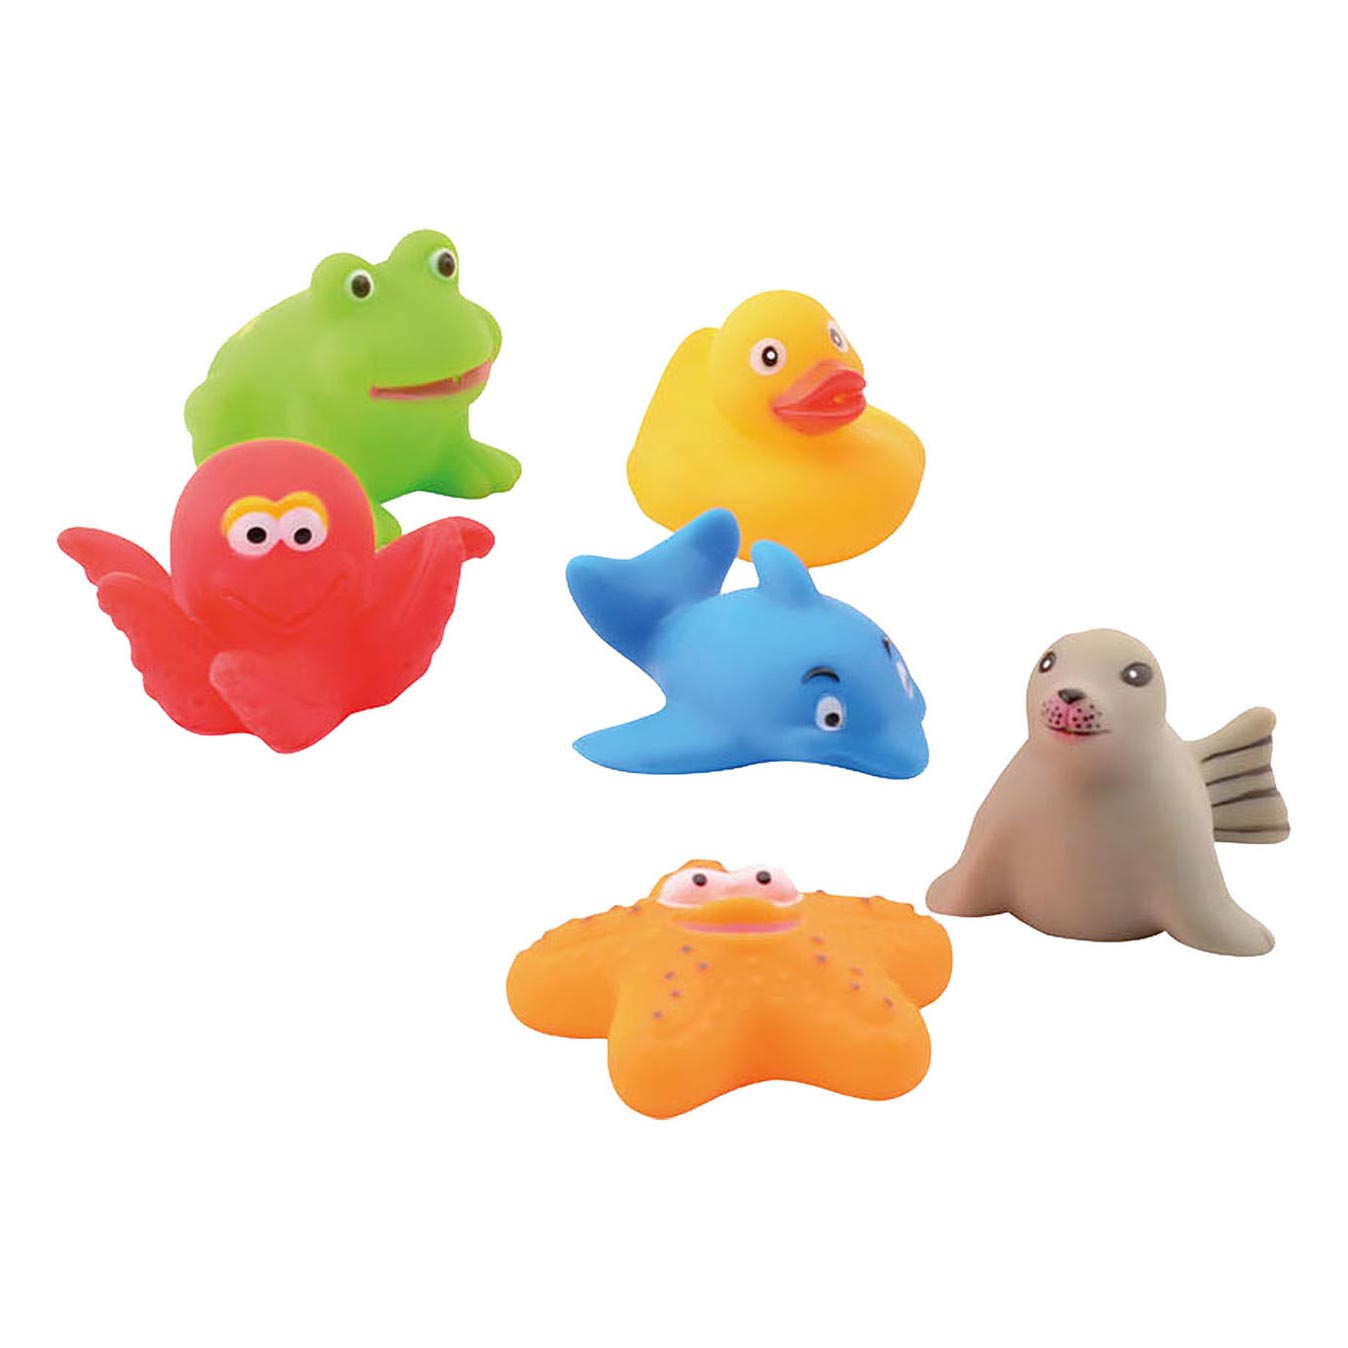 Baby Products Online - Bath Toys for Kids 12pcs Rubber Frogs